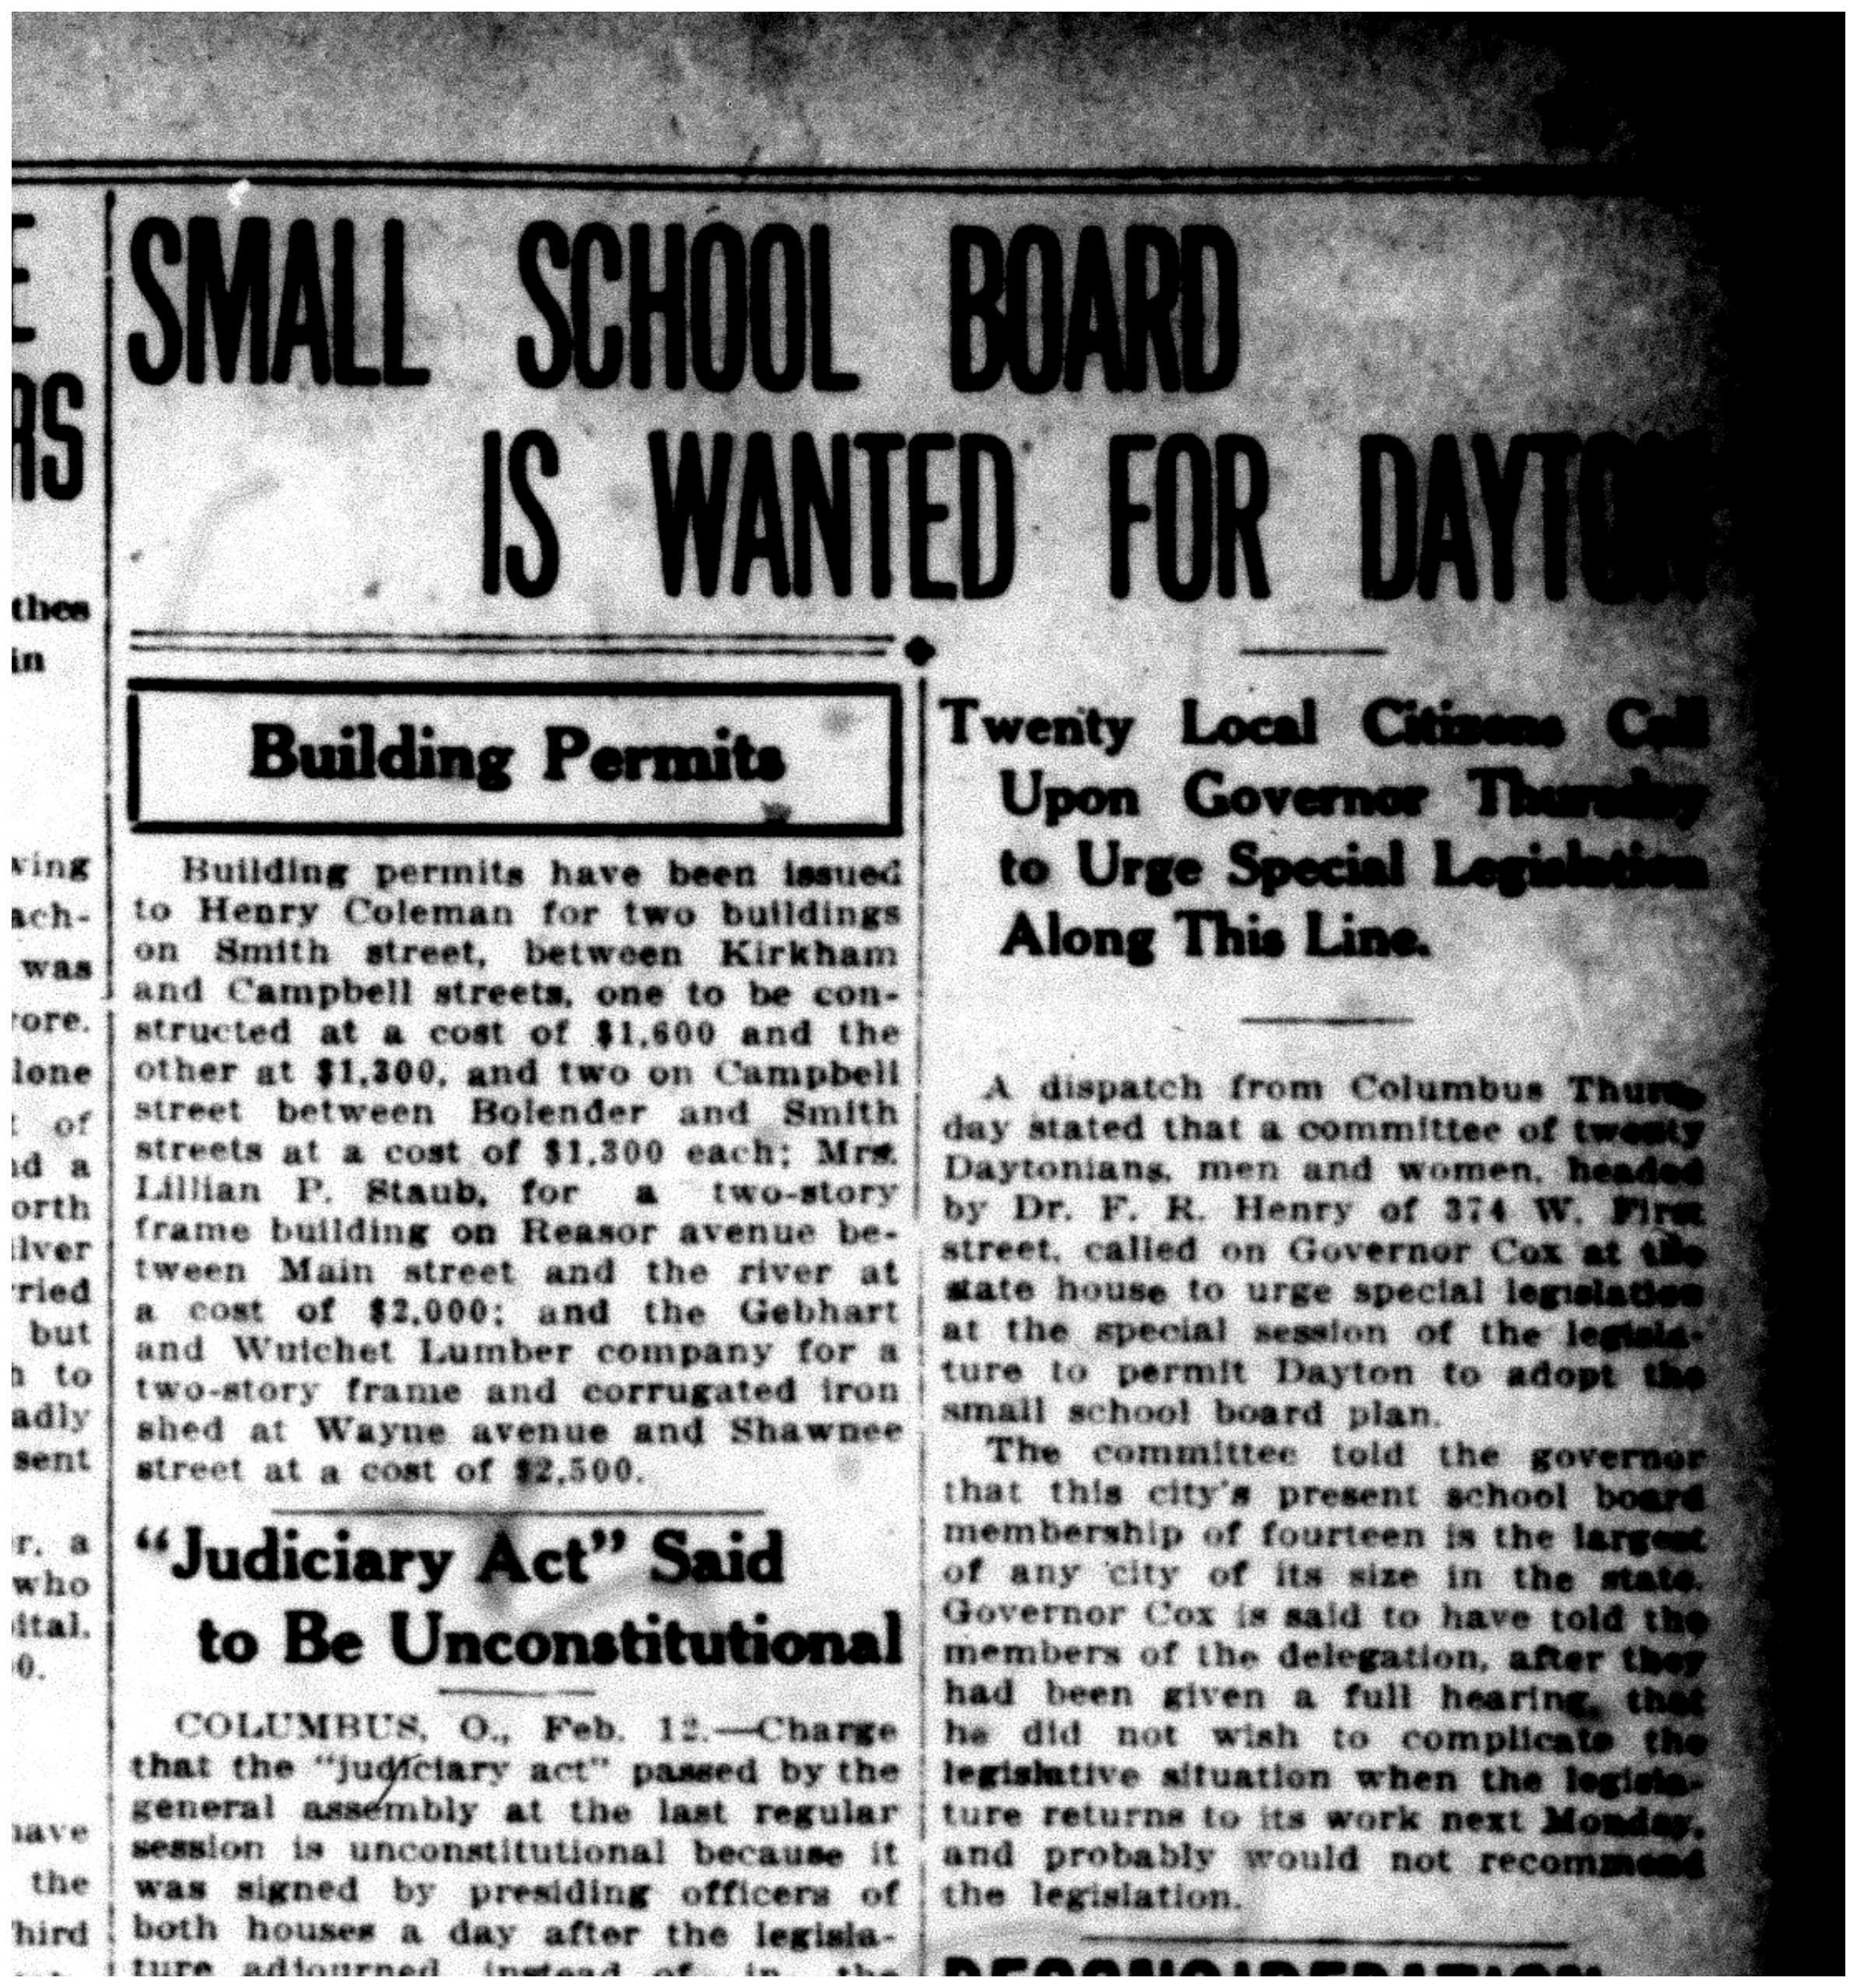 Small School Board is Wanted for Dayton, Dayton Daily News, Feb. 12, 1914